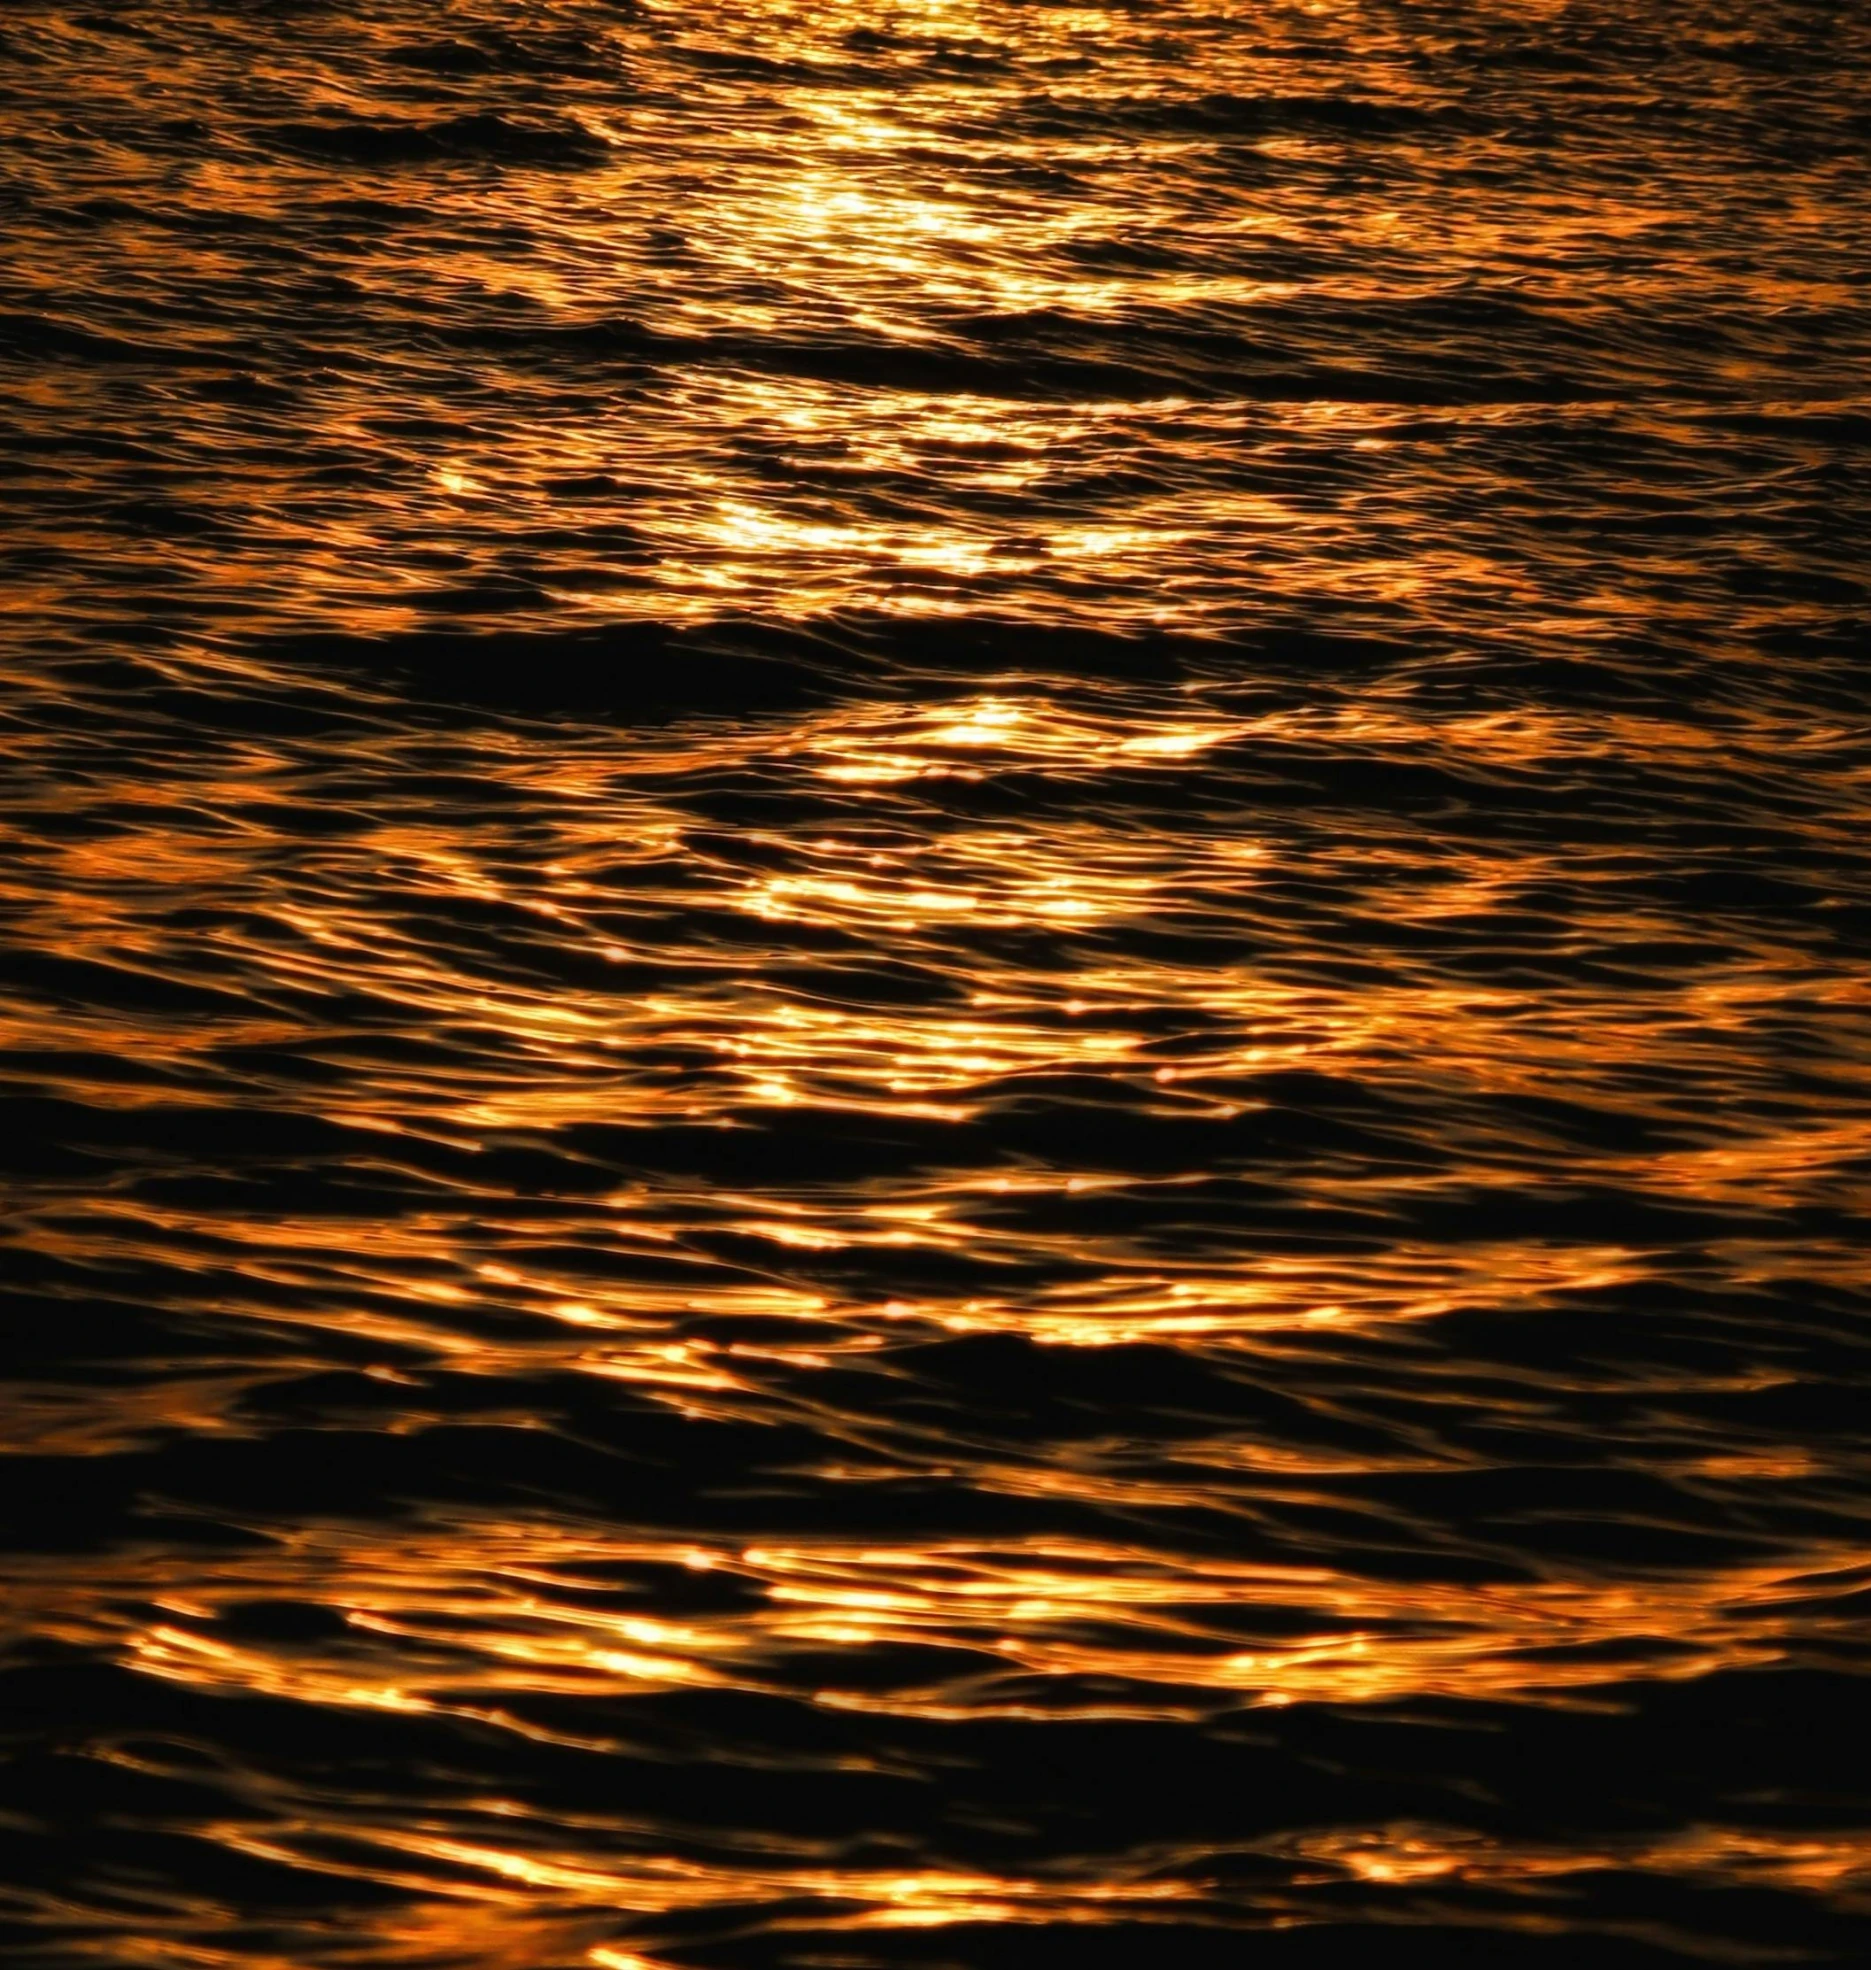 some clouds are reflected in the water as the sun sets